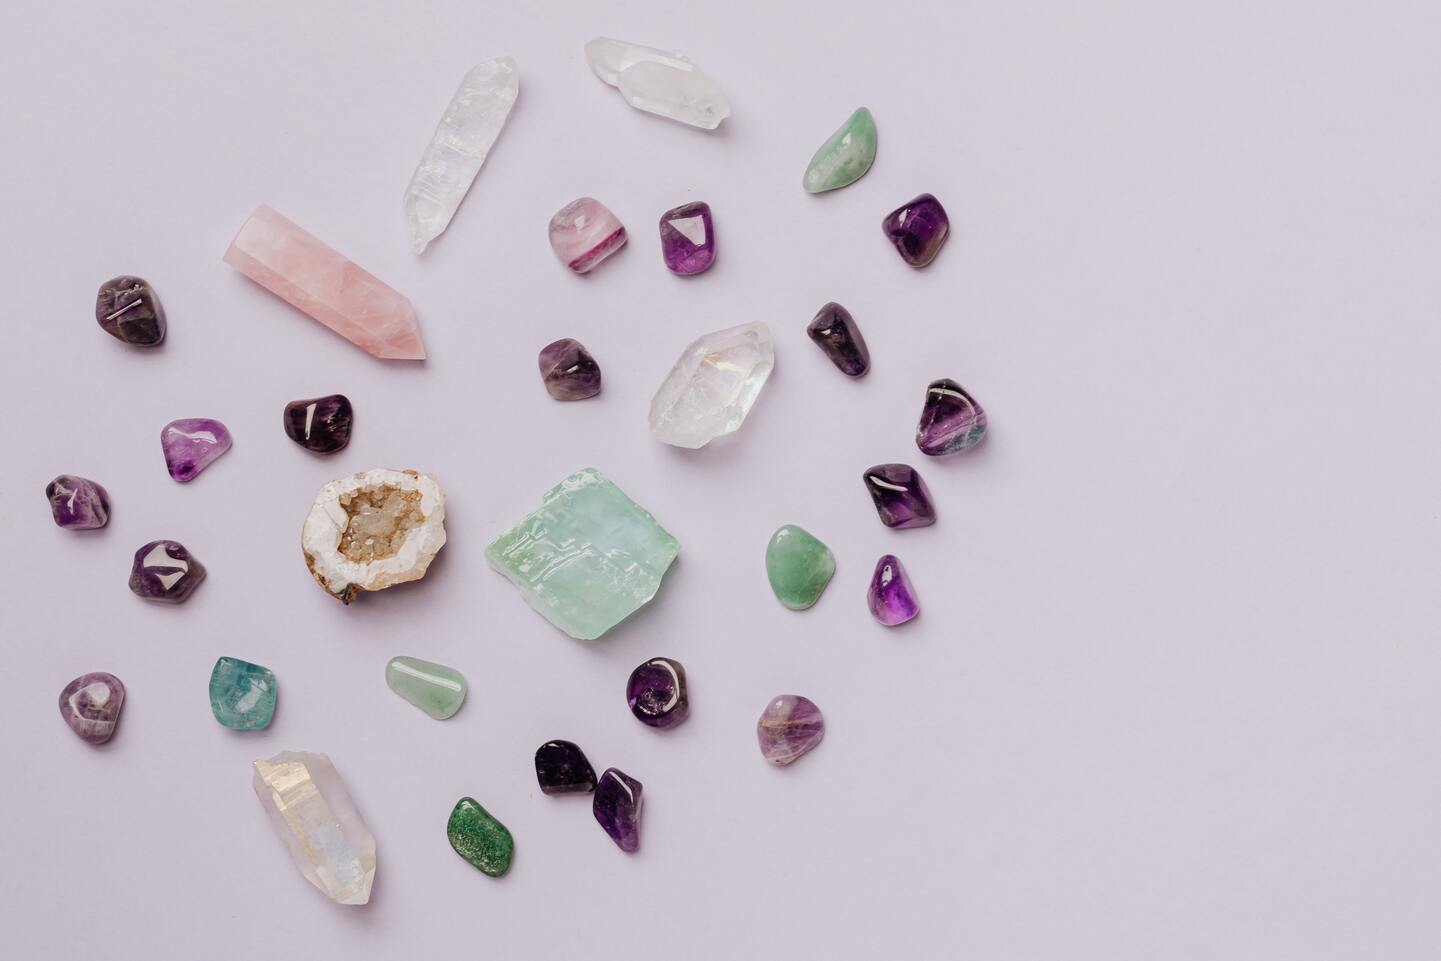 Safekeeping Crystals: Gemstones for Accident Protection